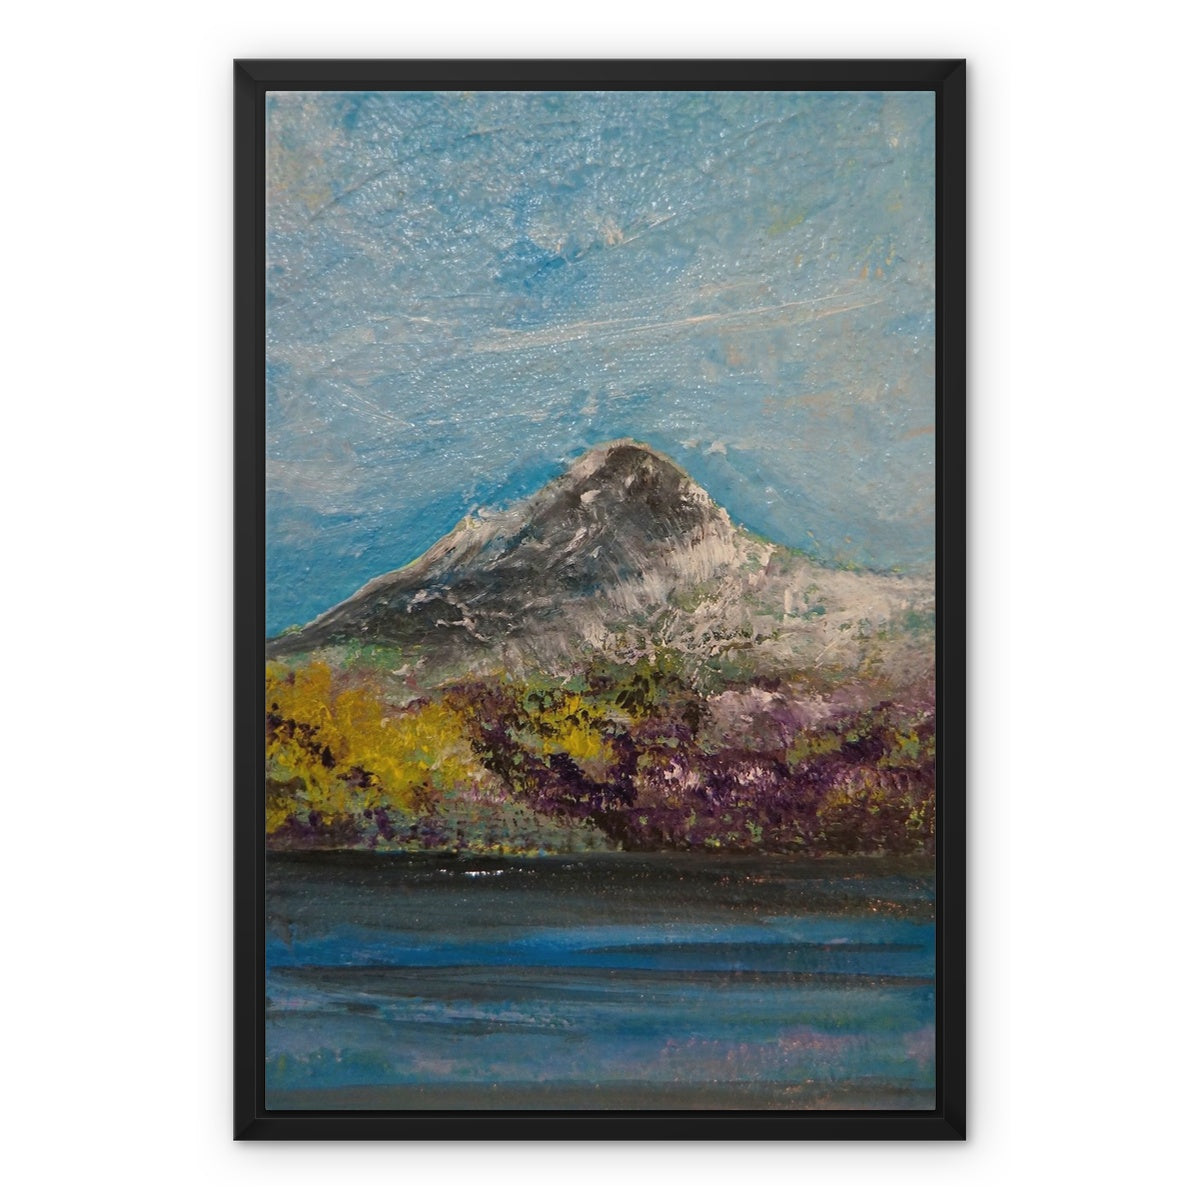 Ben Lomond ii Painting | Framed Canvas From Scotland-Floating Framed Canvas Prints-Scottish Lochs & Mountains Art Gallery-18"x24"-Paintings, Prints, Homeware, Art Gifts From Scotland By Scottish Artist Kevin Hunter